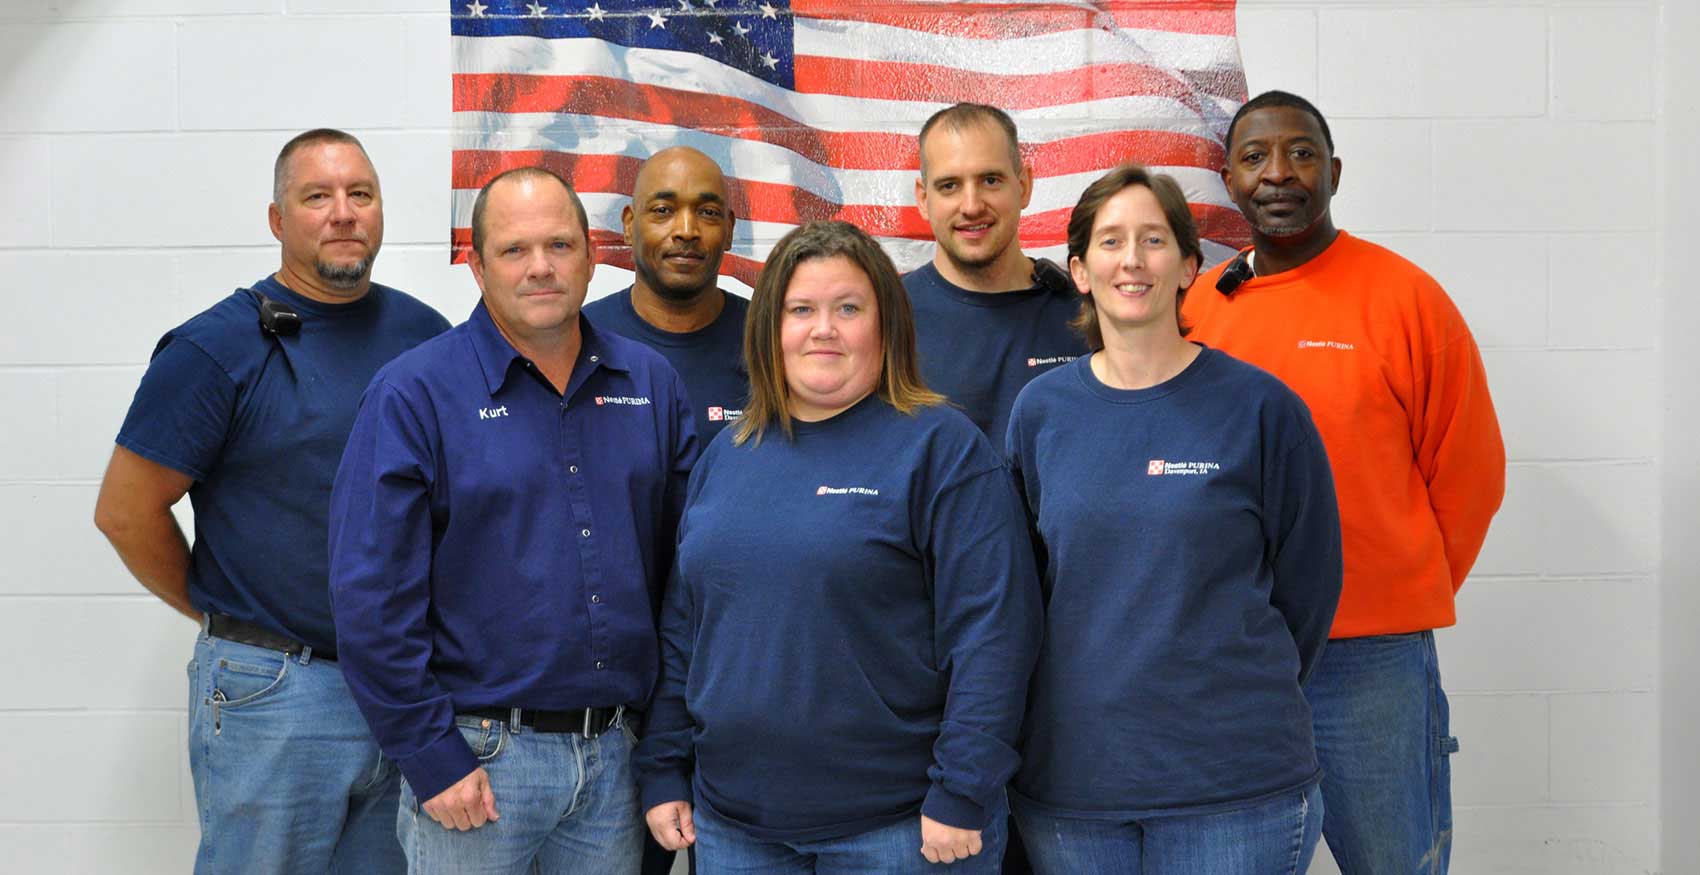 Associates standing in front of American flag painting